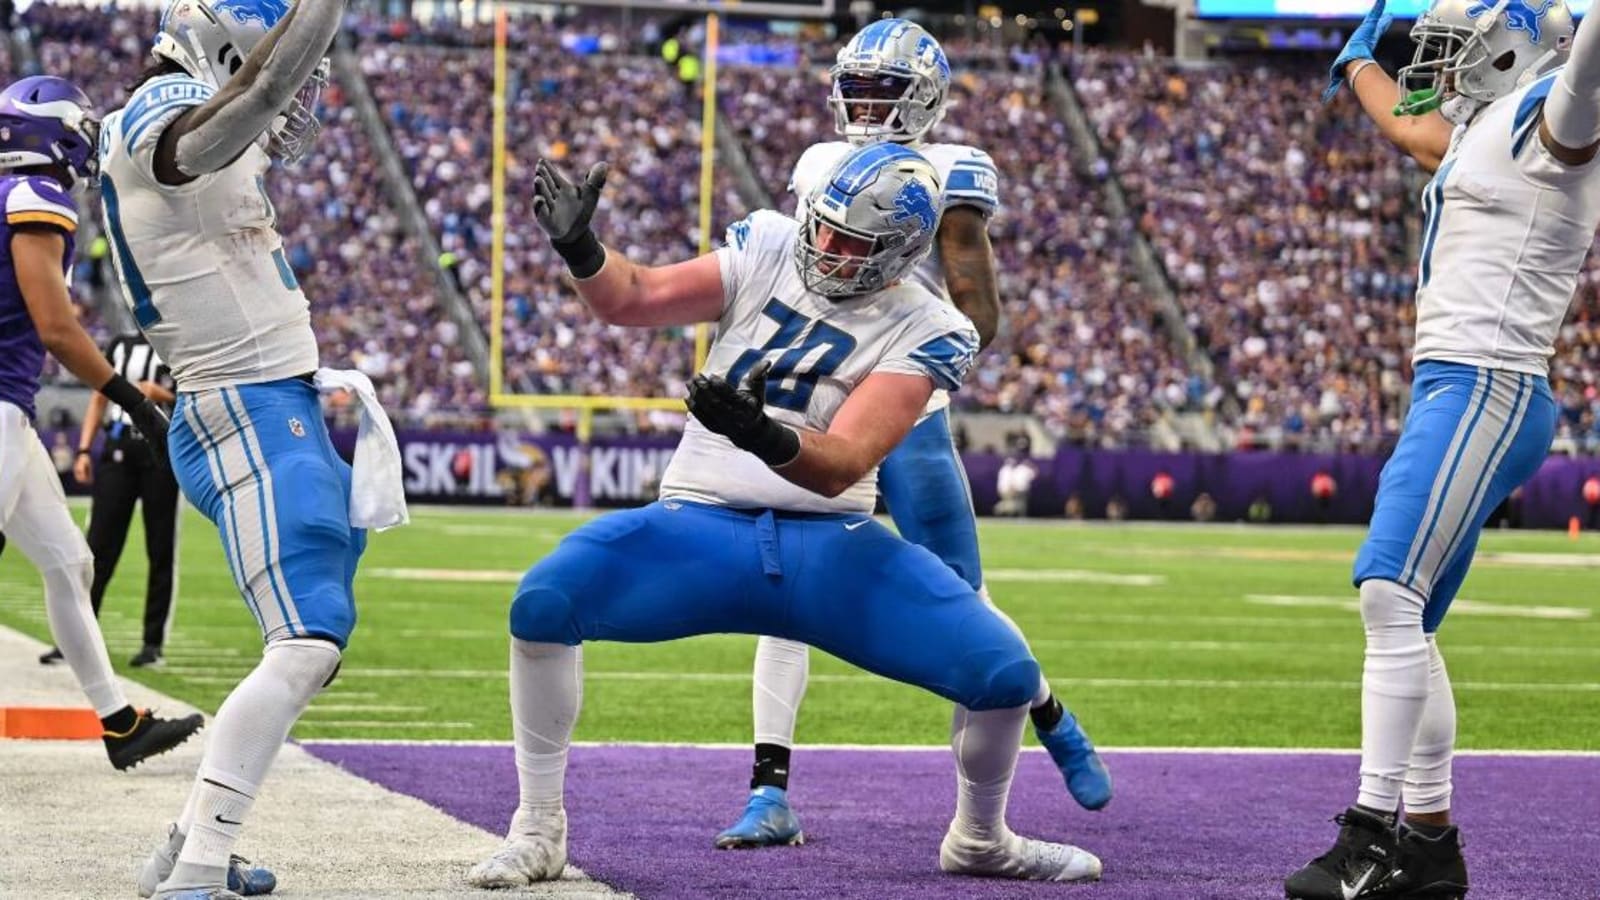 Lions tackle Dan Skipper hauls in catch vs. Vikings after Cowboys reporting controversy